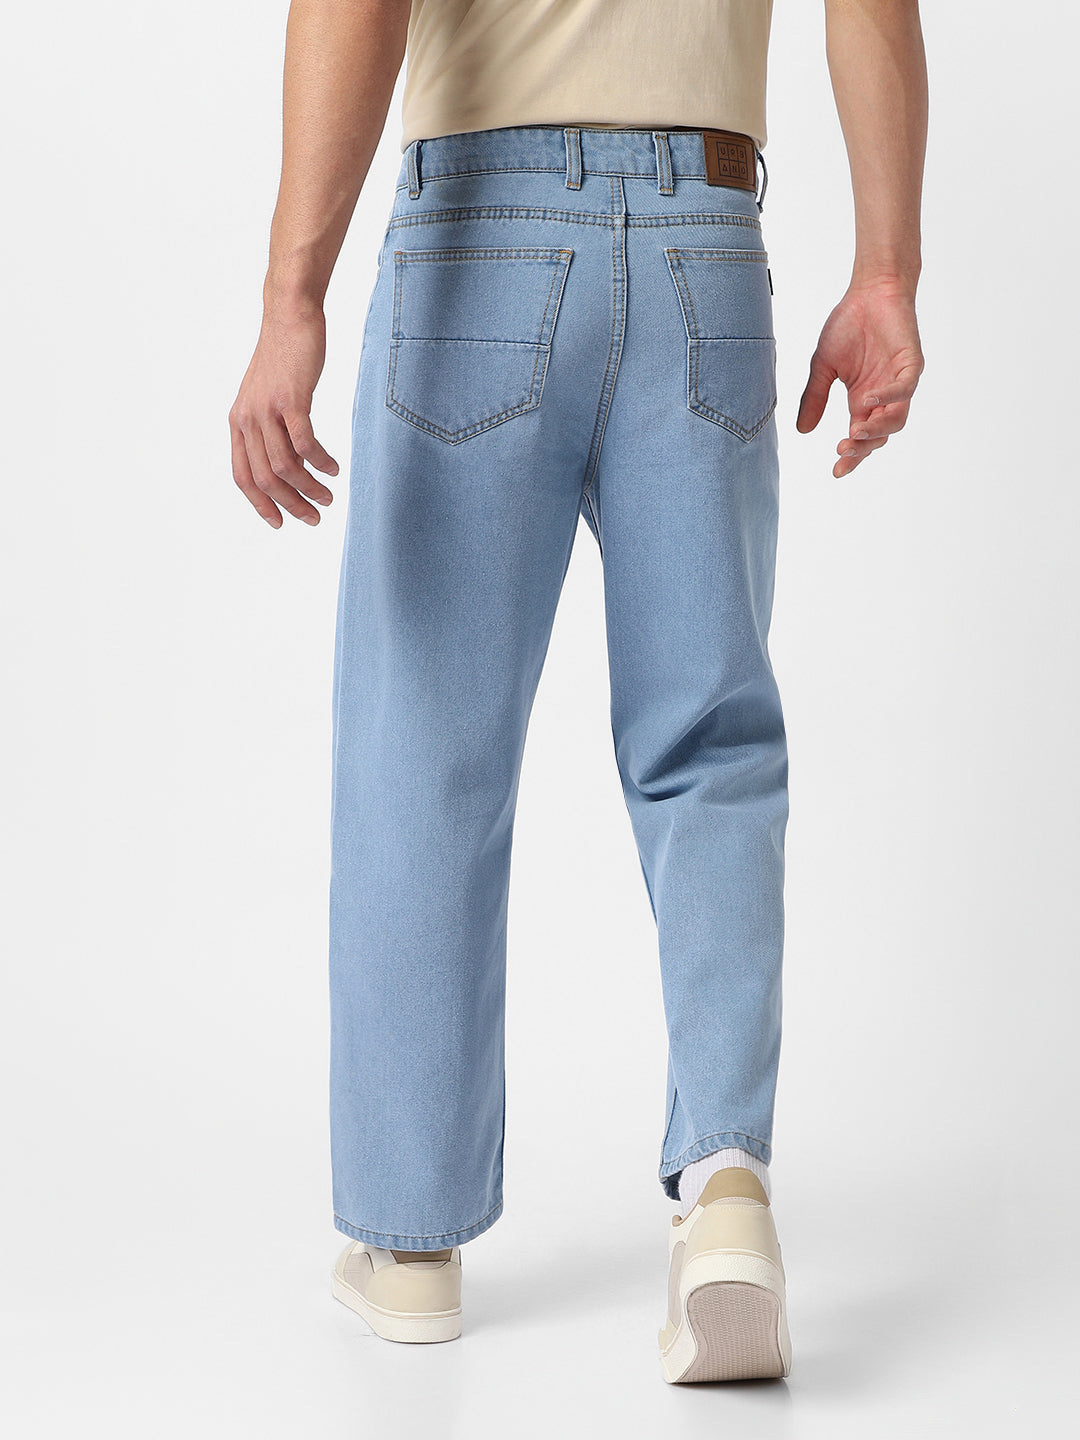 Men's Ice Blue Loose Fit Washed Jeans Non-Stretchable